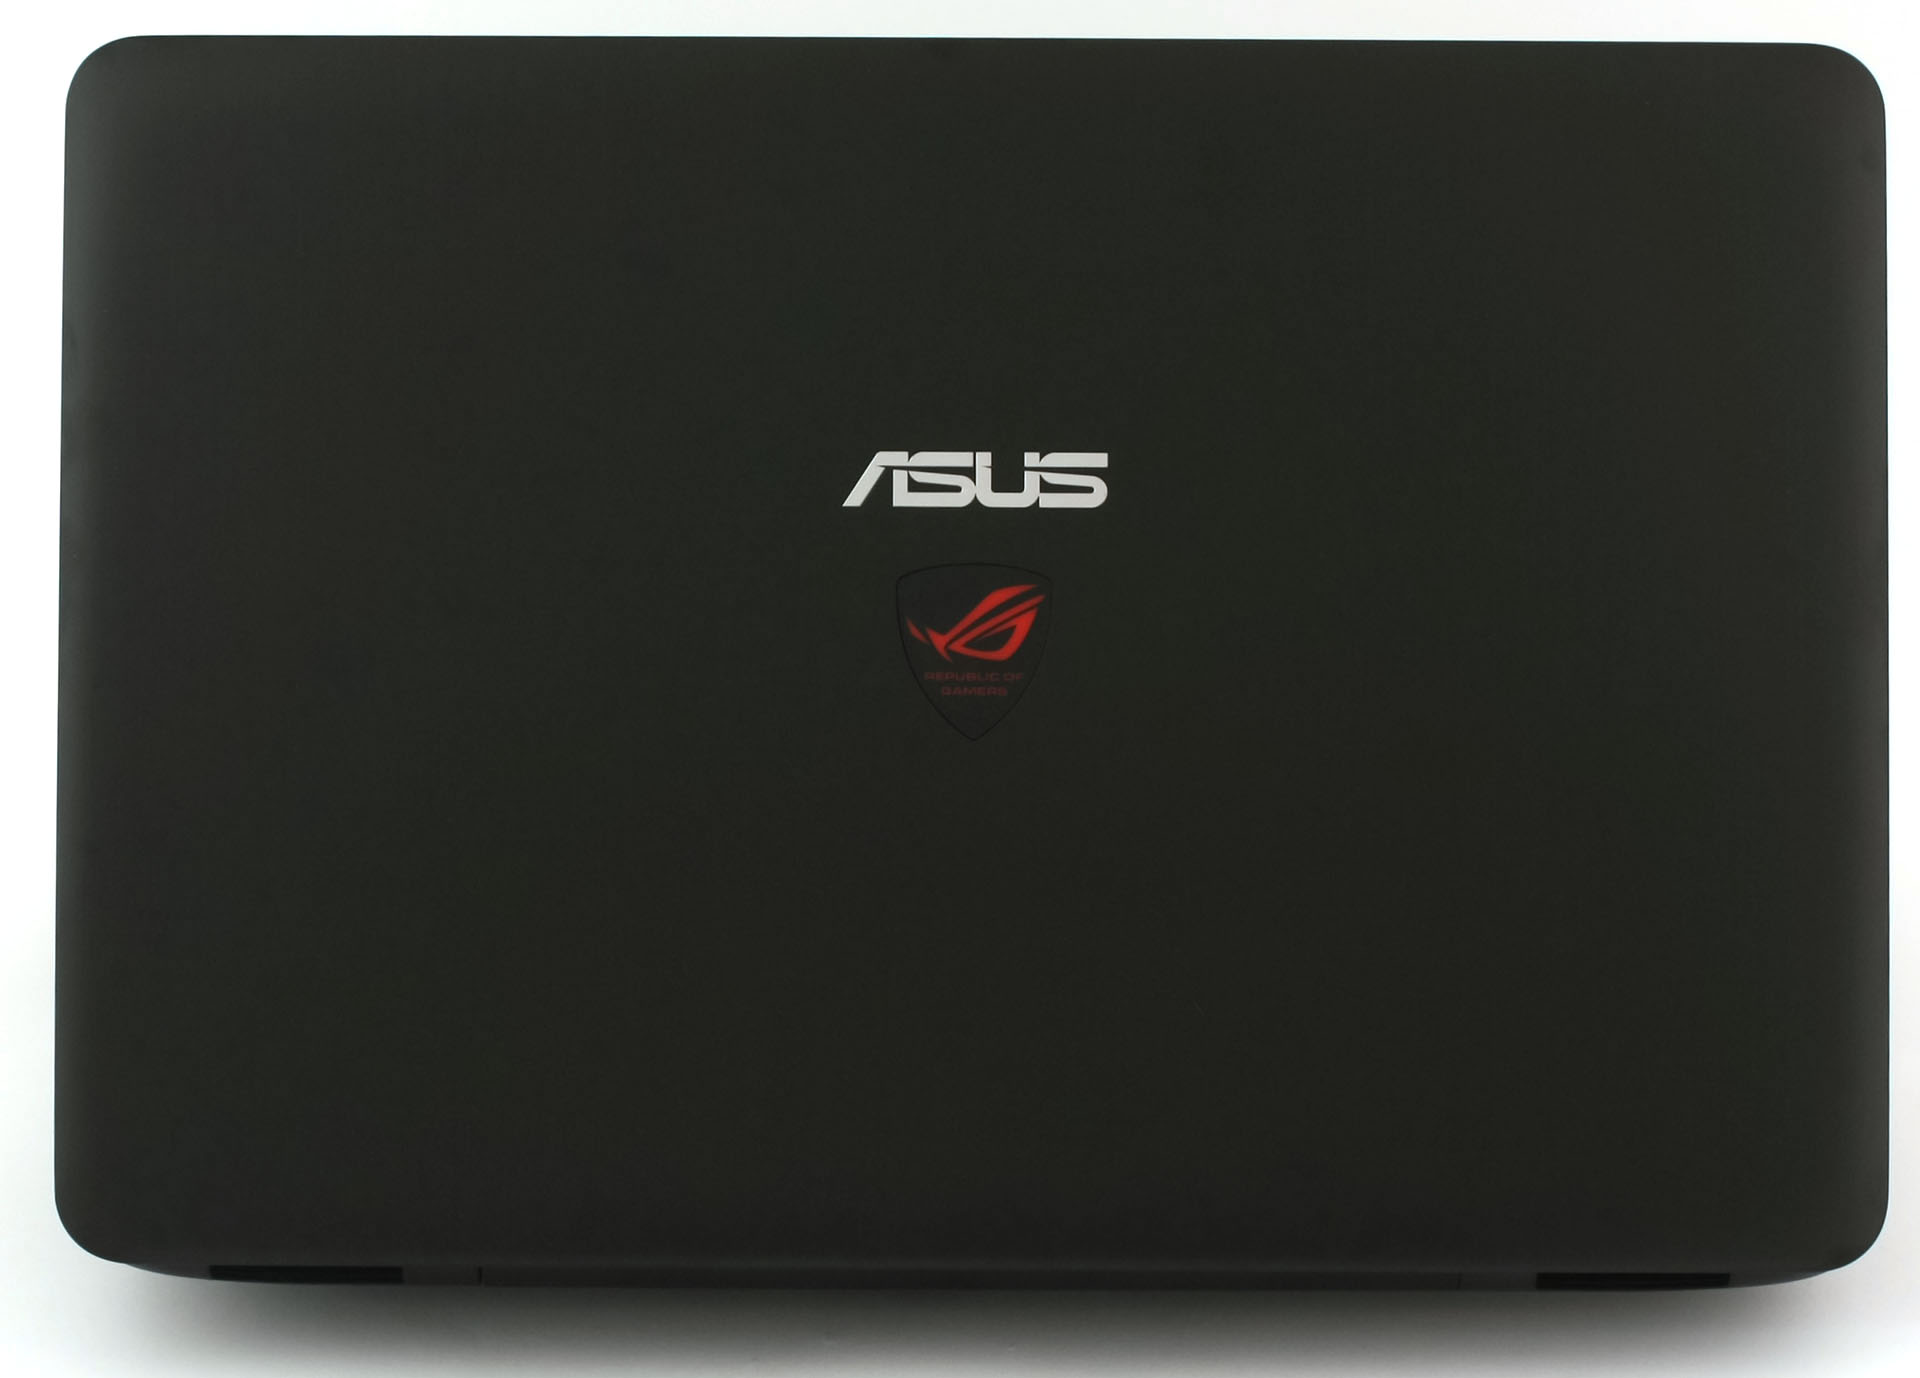 konstant Lederen Dripping ASUS ROG G551JW (GeForce GTX 960M) review - despite the obvious advantage  of the G501, the G551 proves that it's not obsolete yet | LaptopMedia.com